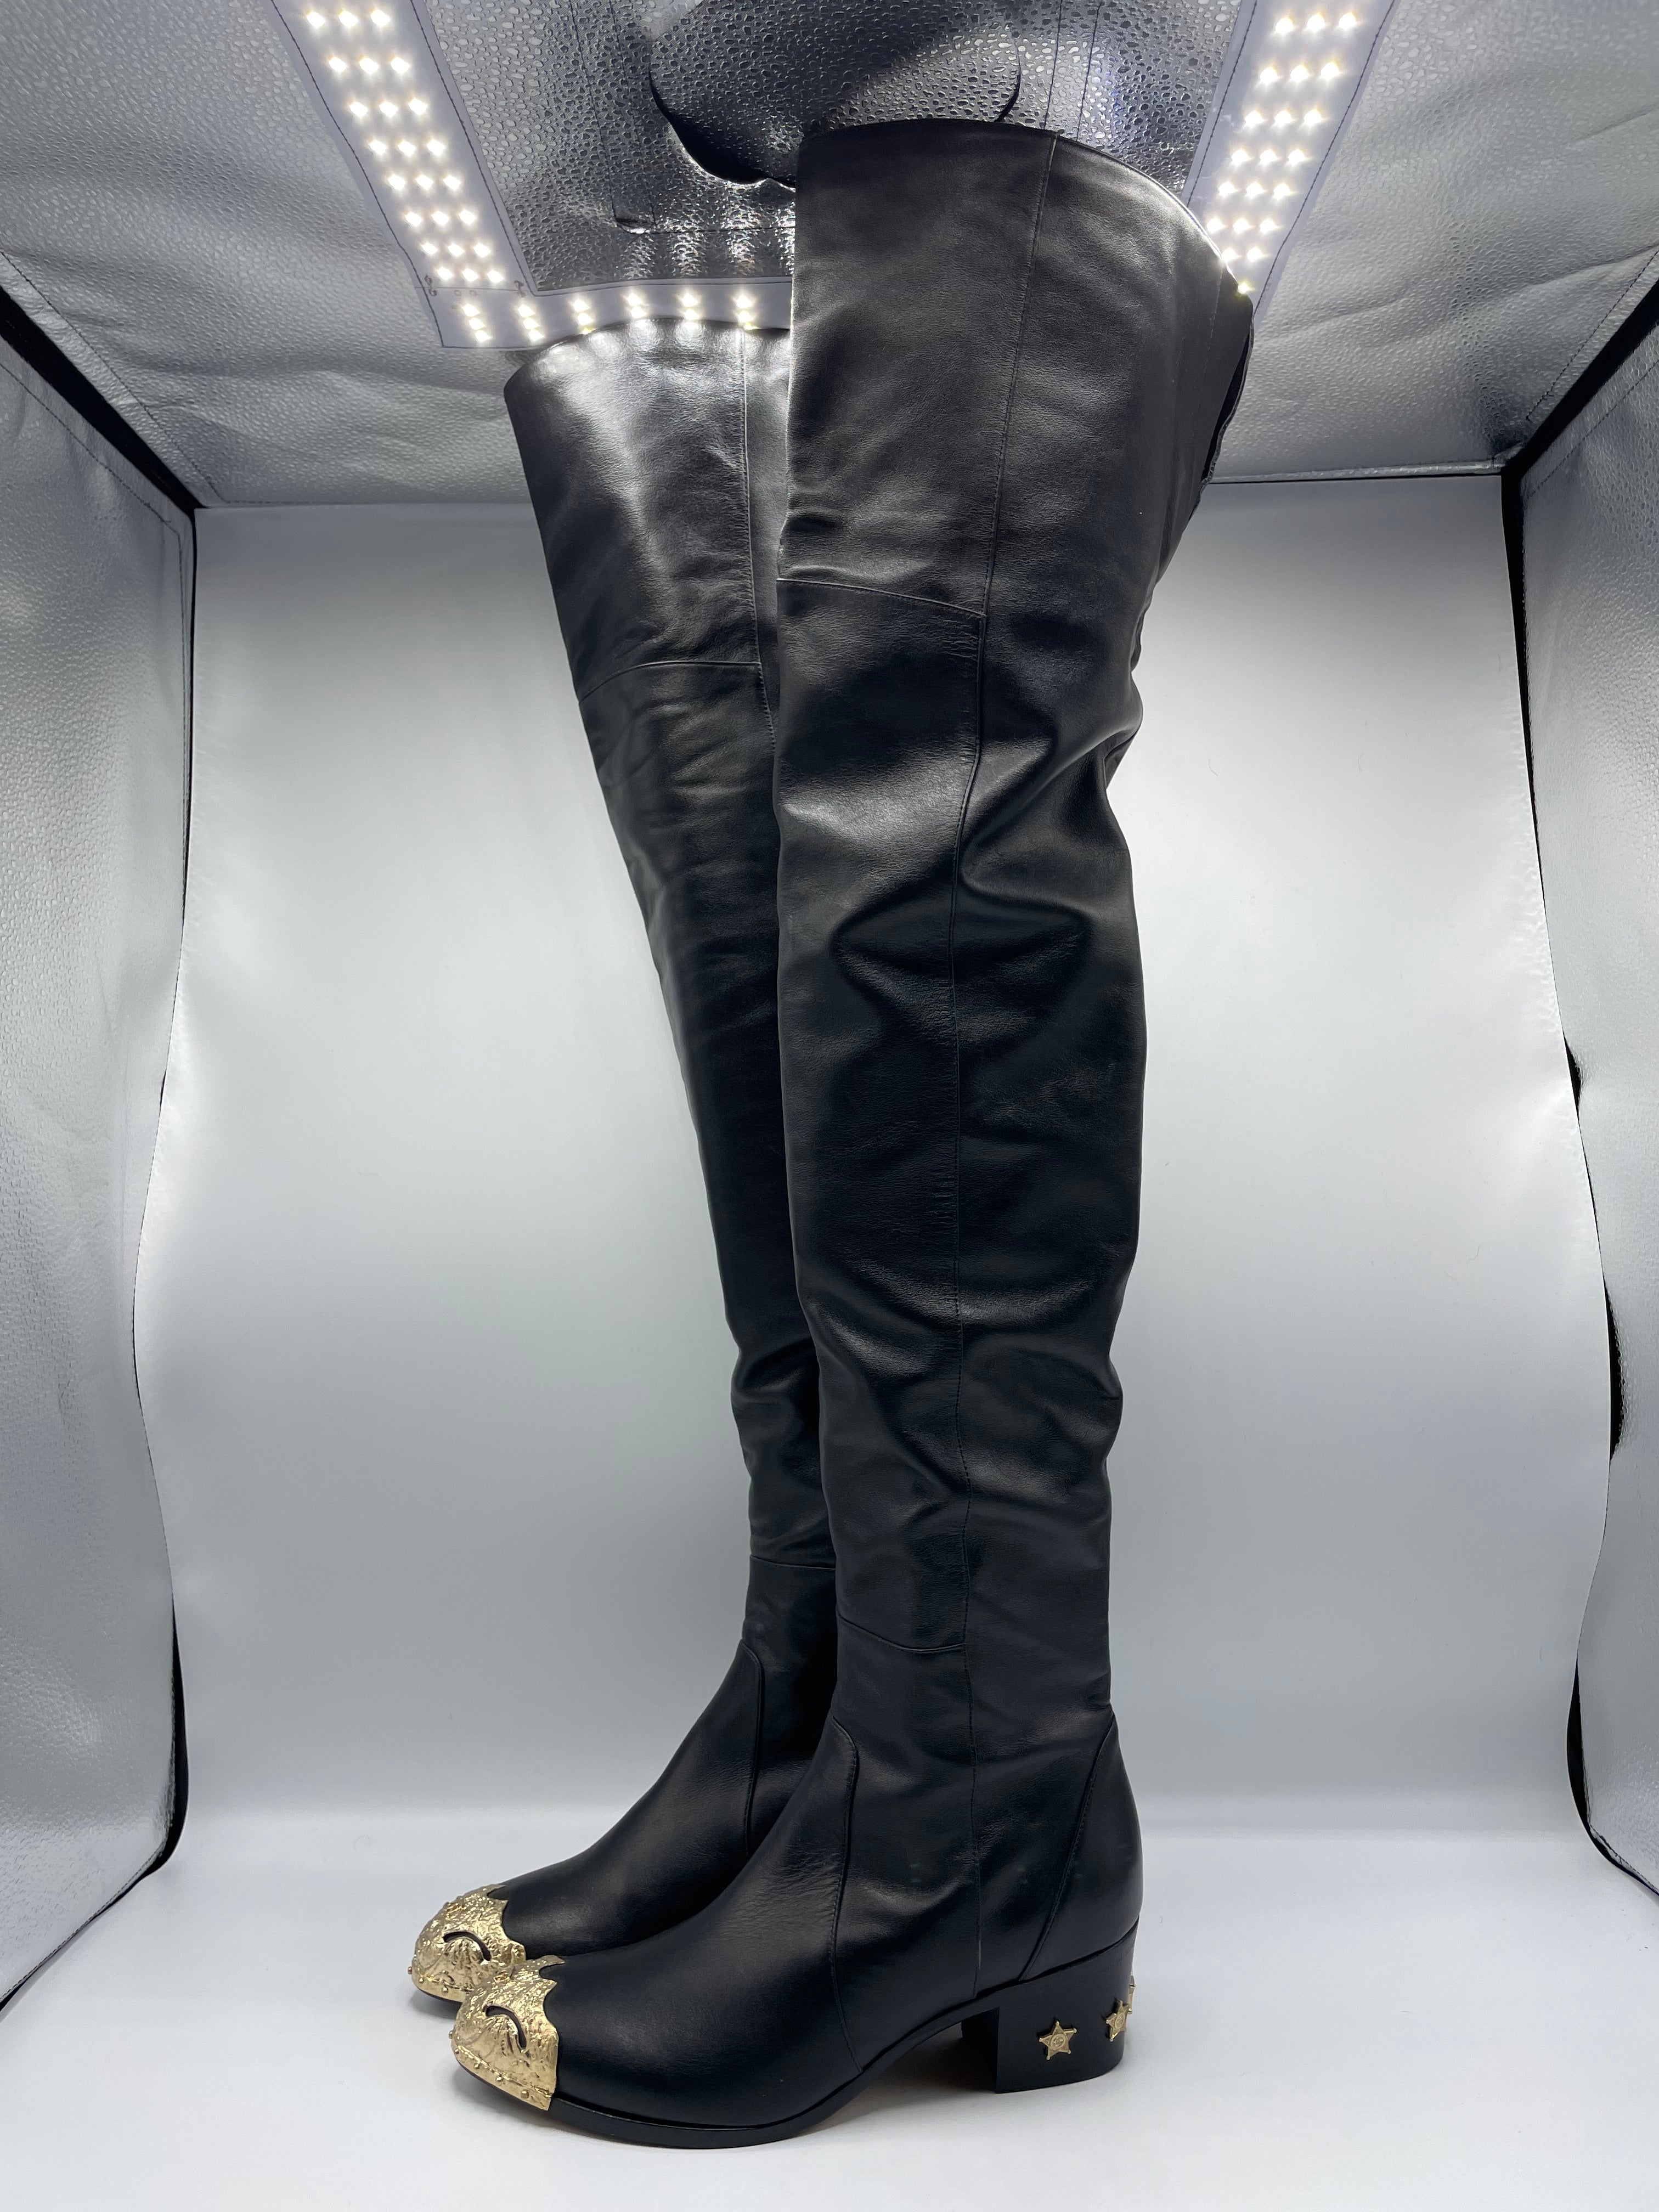 Chanel Thigh High Boots Size 40. Those black leather with gold hardware Chanel boots are timeless and in excellent shape. The sole has never been used before and is in fantastic condition.Paris-Dallas collection (2013-2014) . Made in Italy. Size 40.